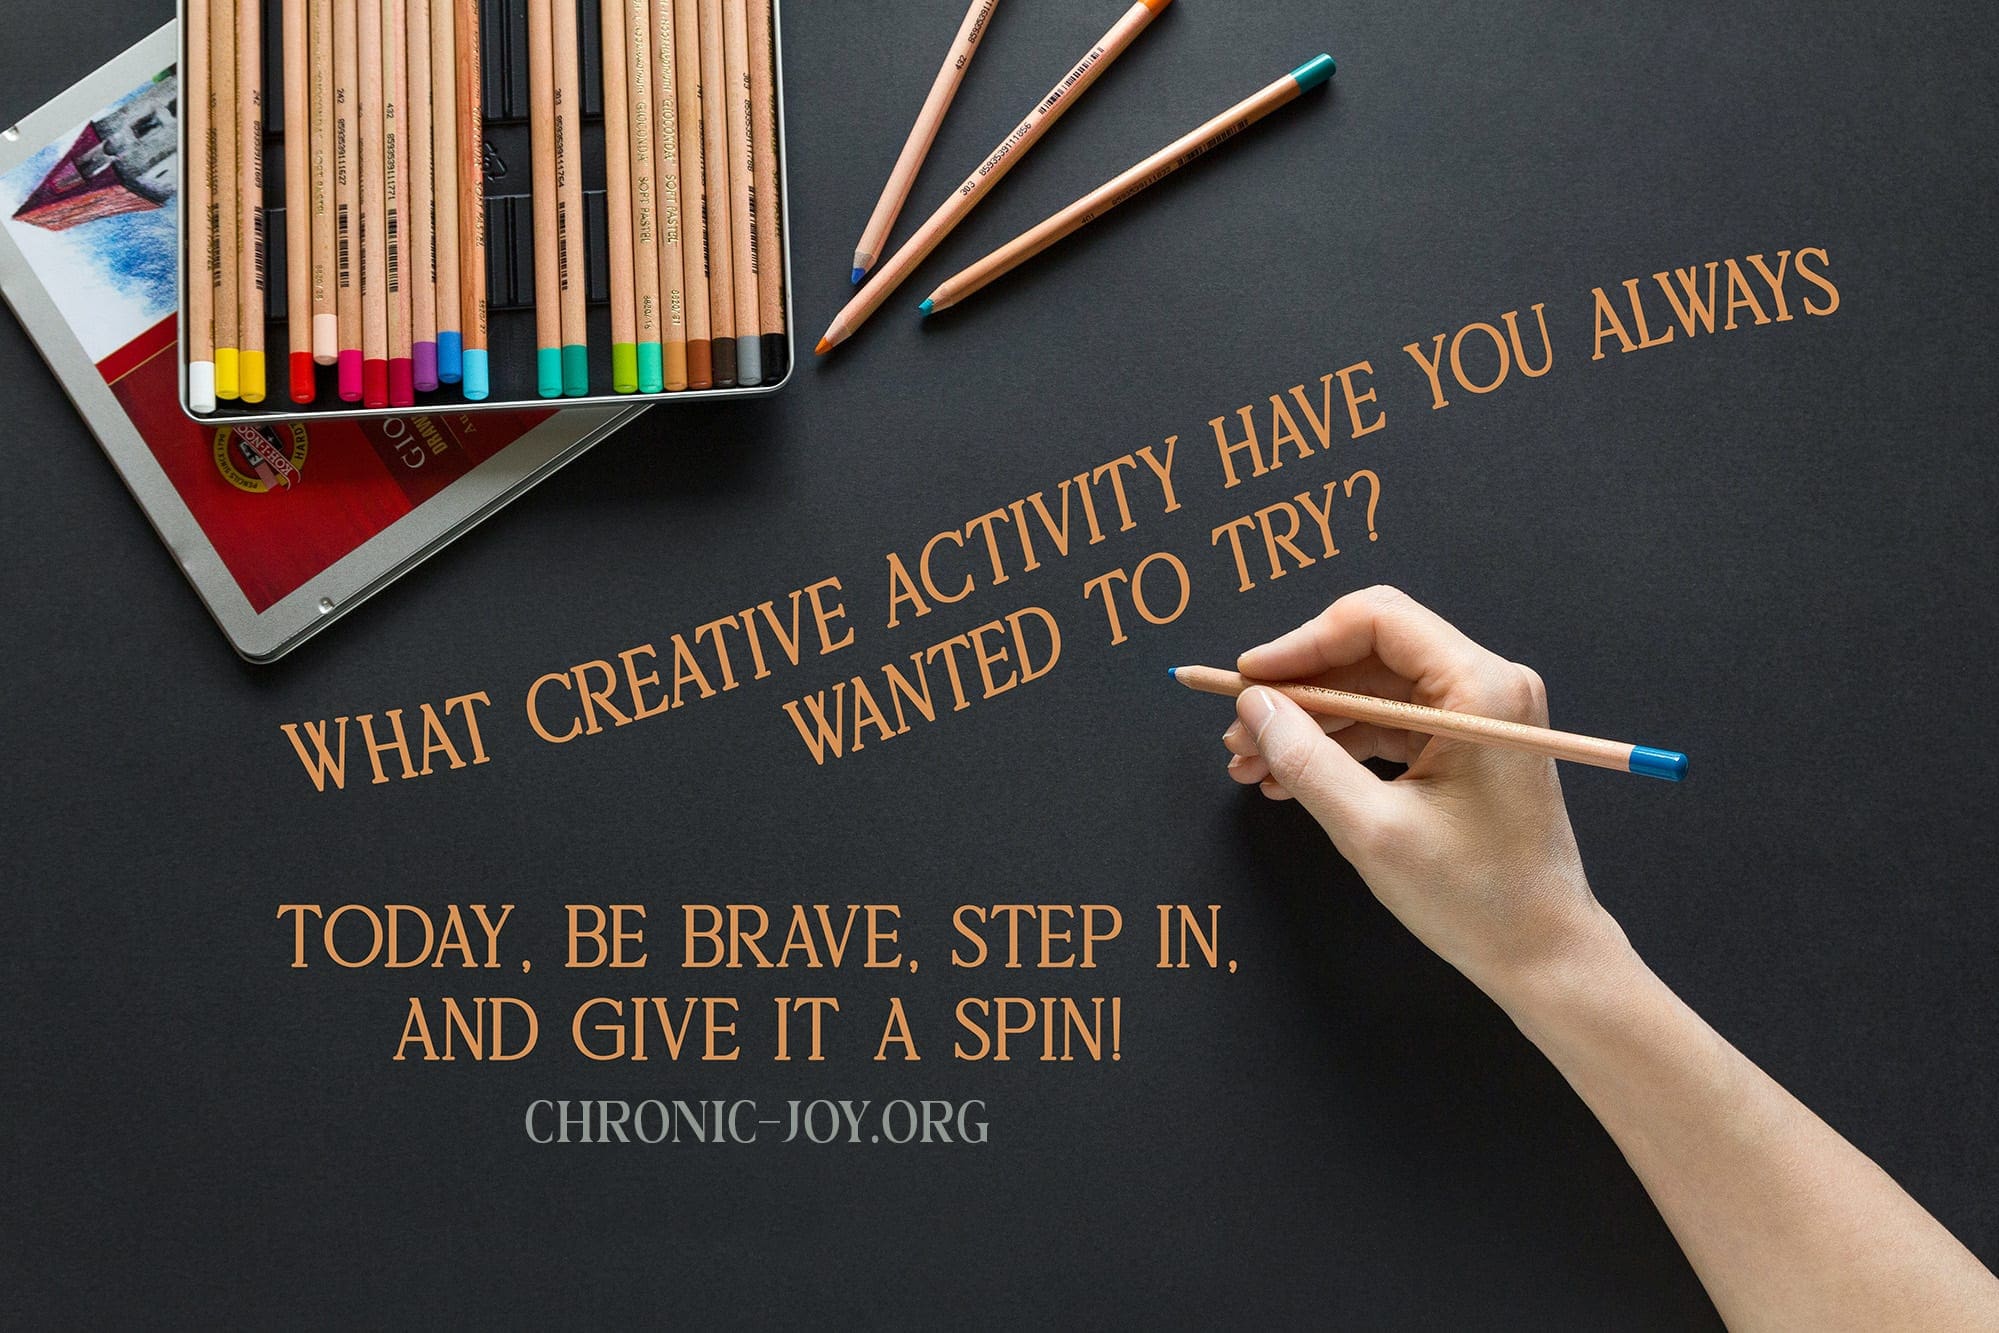 "What creative activity have you always wanted to try? Today, be brave, step in, and give it a spin!"